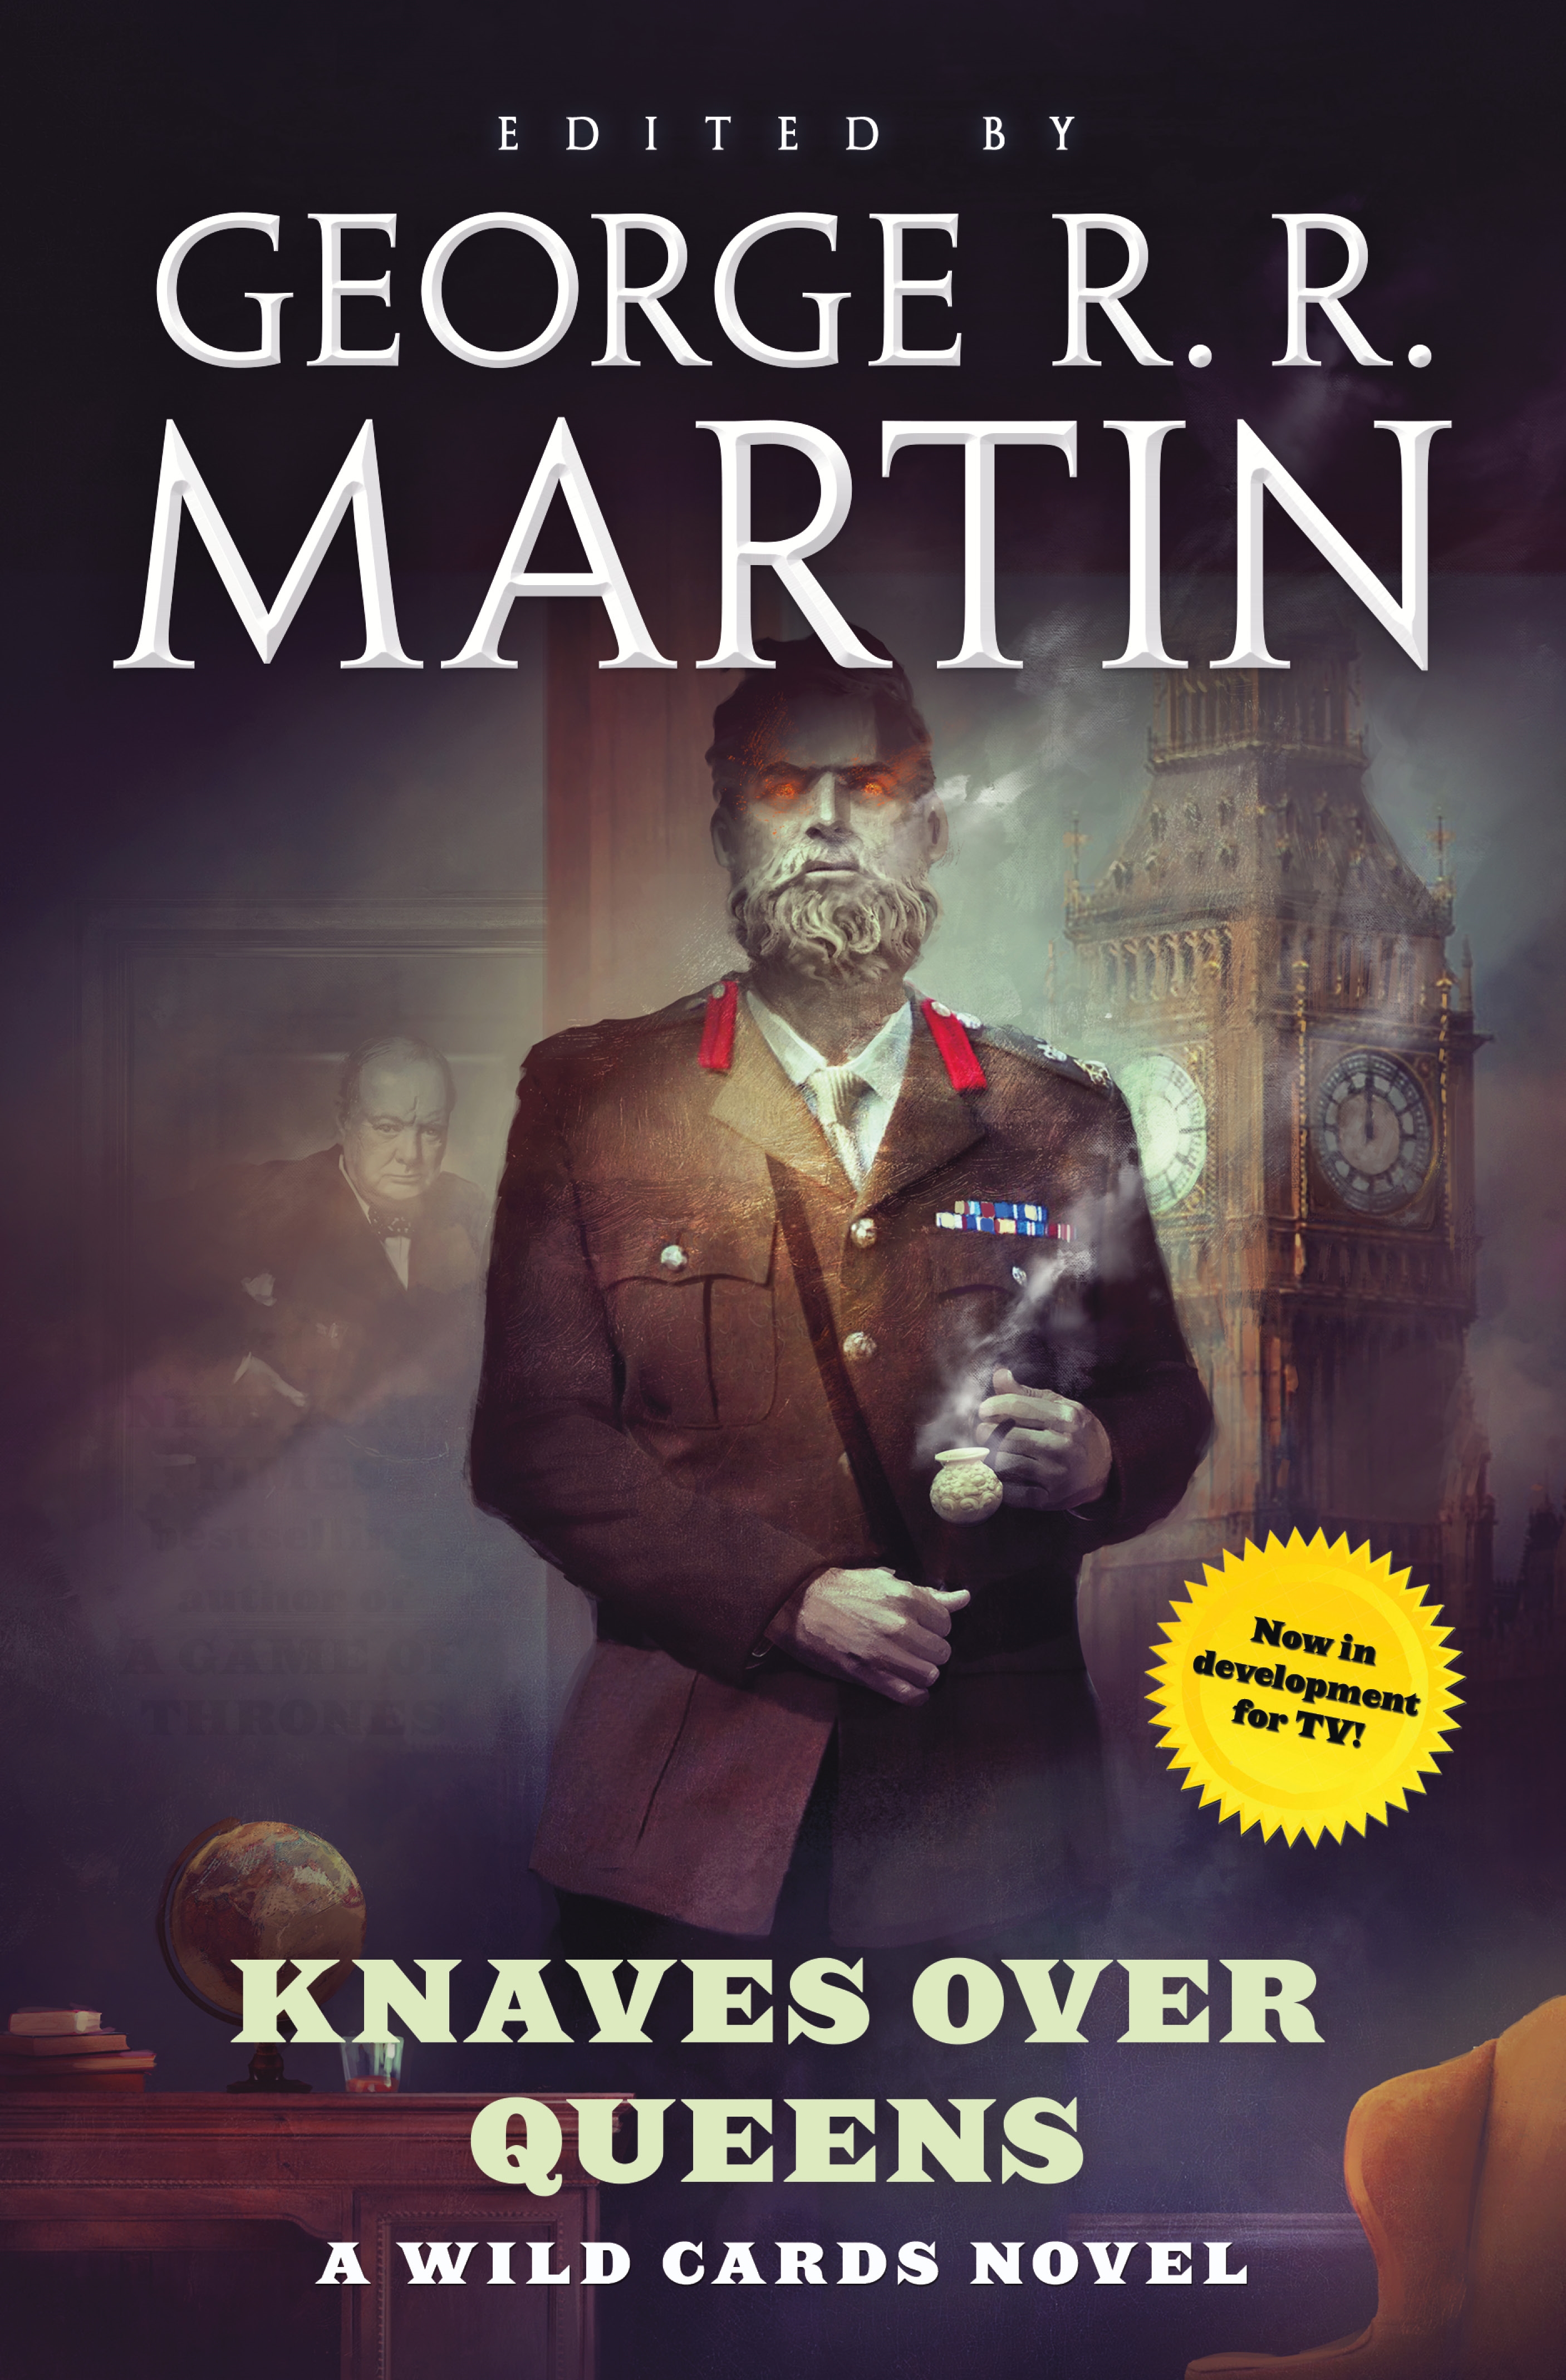 Knaves Over Queens : A Wild Cards Novel (Book One of the British Arc) by George R. R. Martin